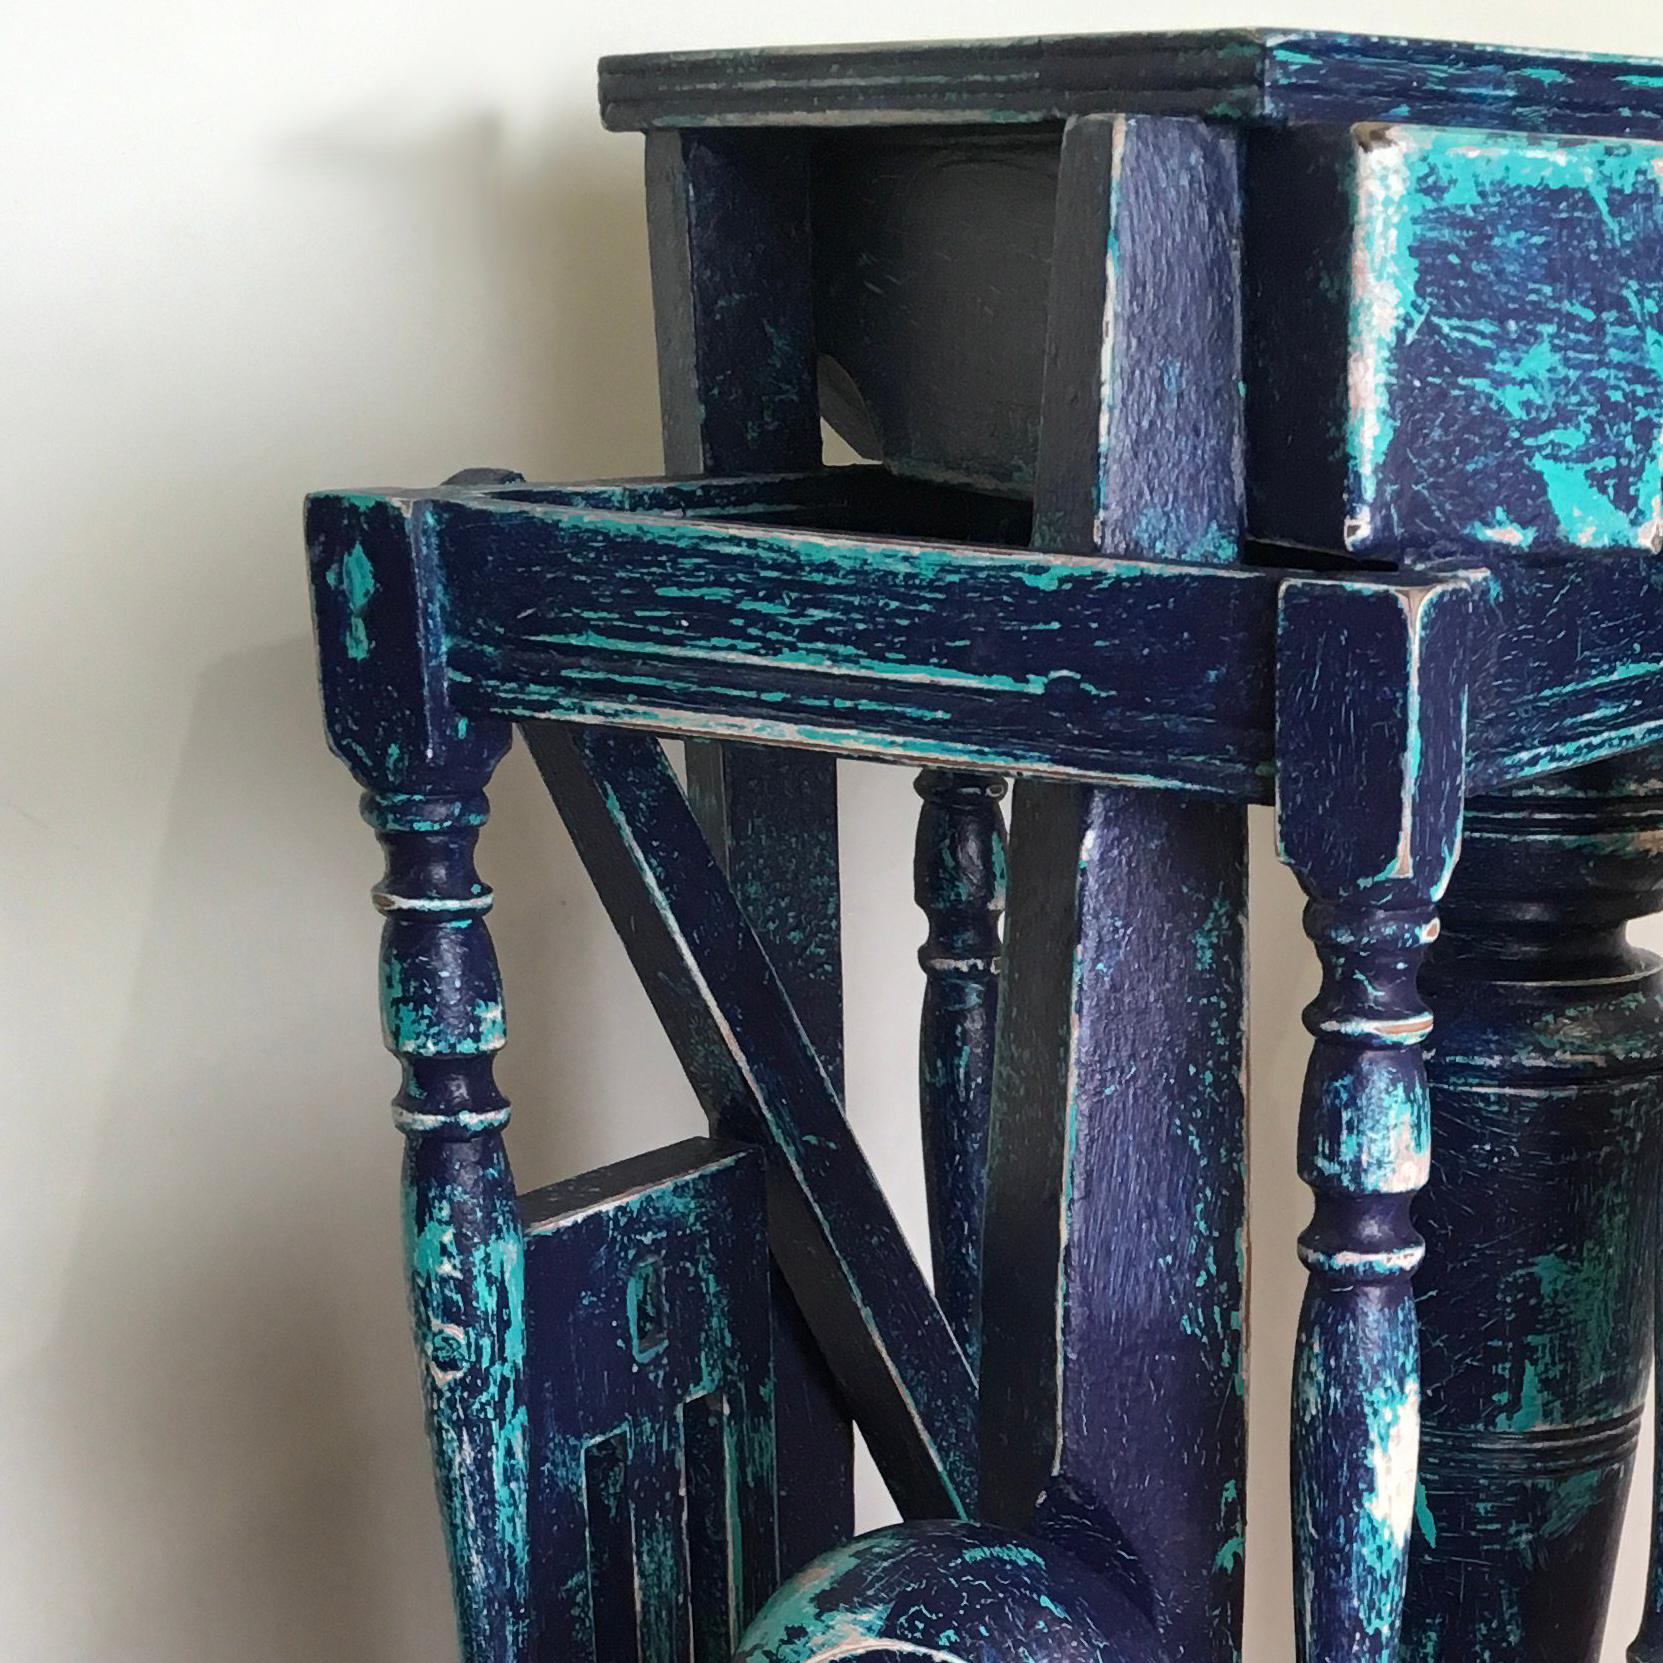 Crash Table 5, Found Object Pedestal Sculpture with Drawer - Contemporary Mixed Media Art by John Seubert